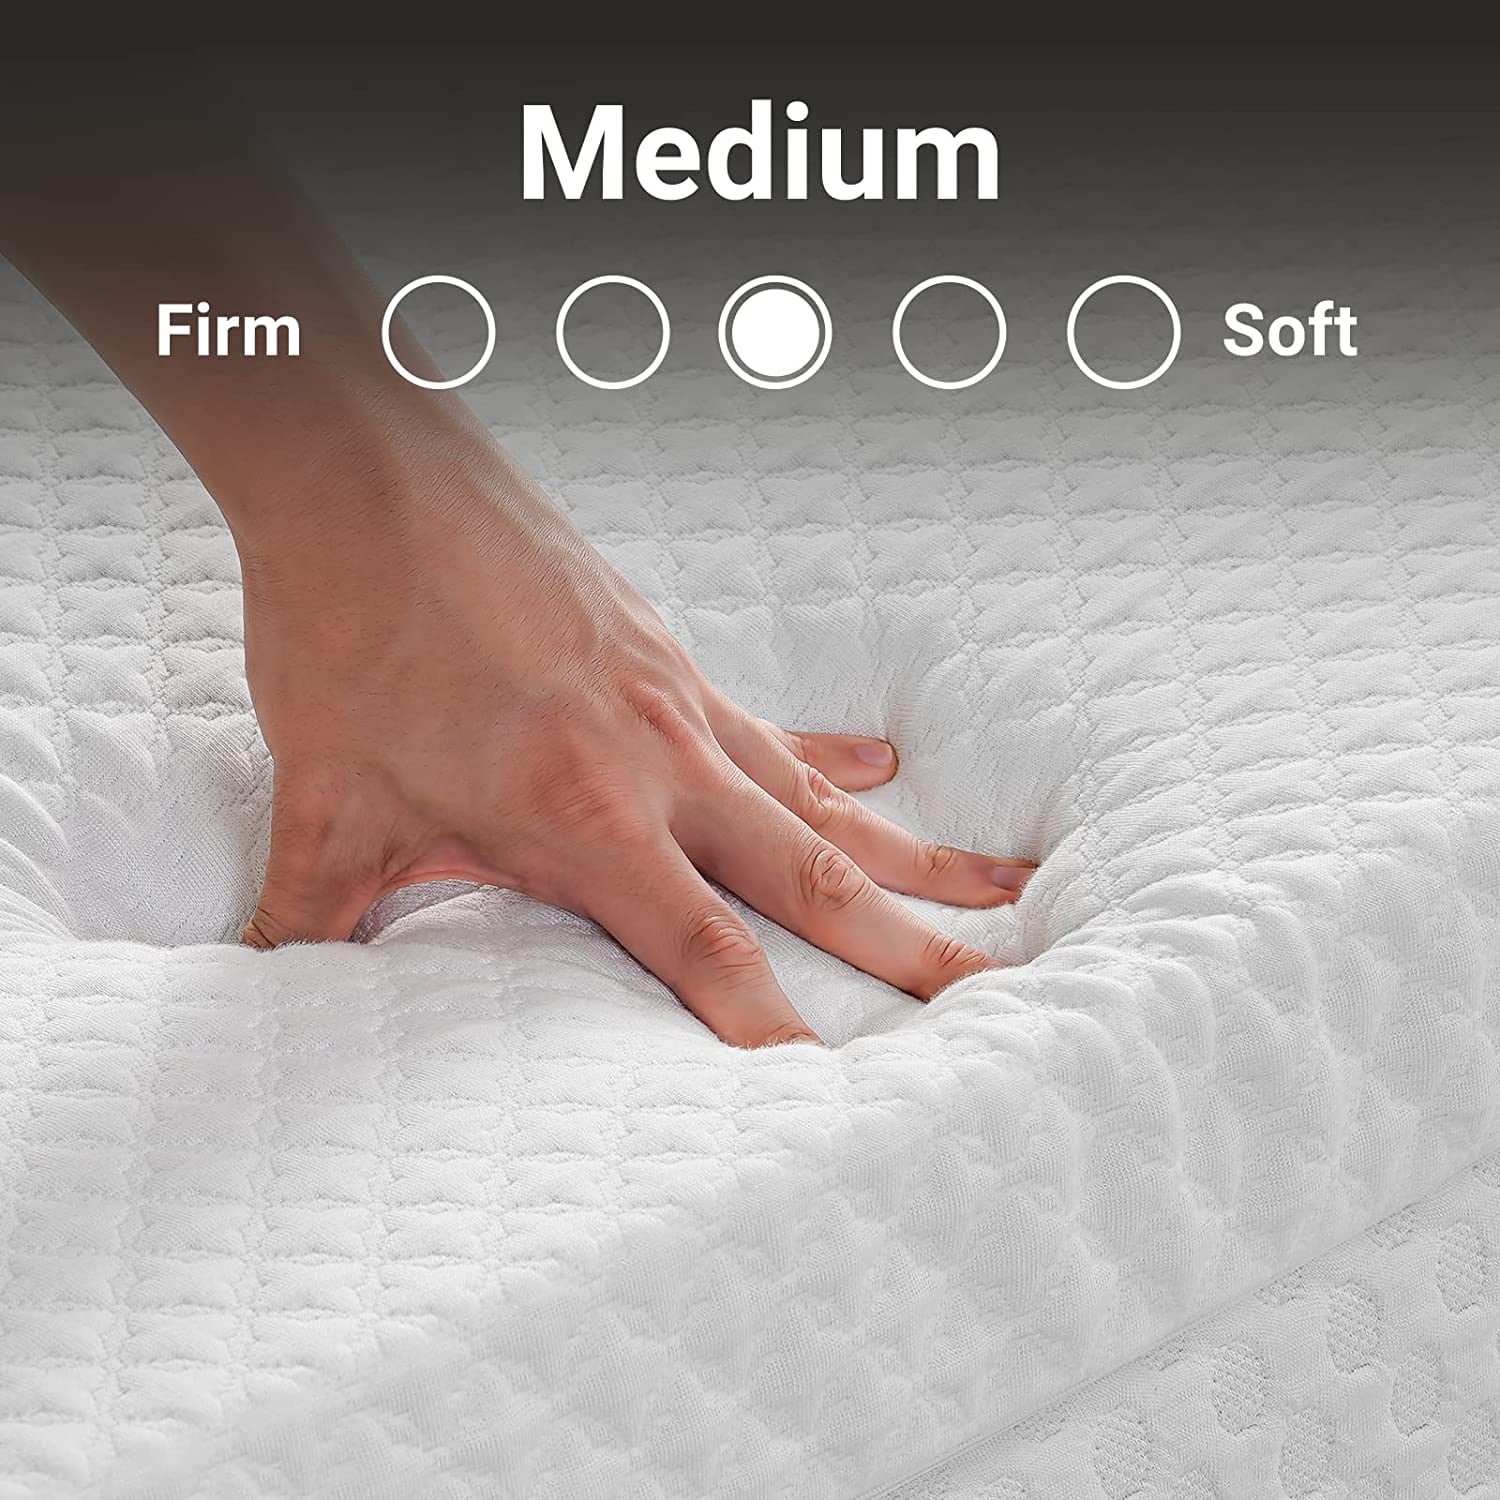 Emolli 3 inch Memory Foam Mattress Topper Full Size with Removable Bamboo Cover - Gel Infused High Density Cooling Bed Pad